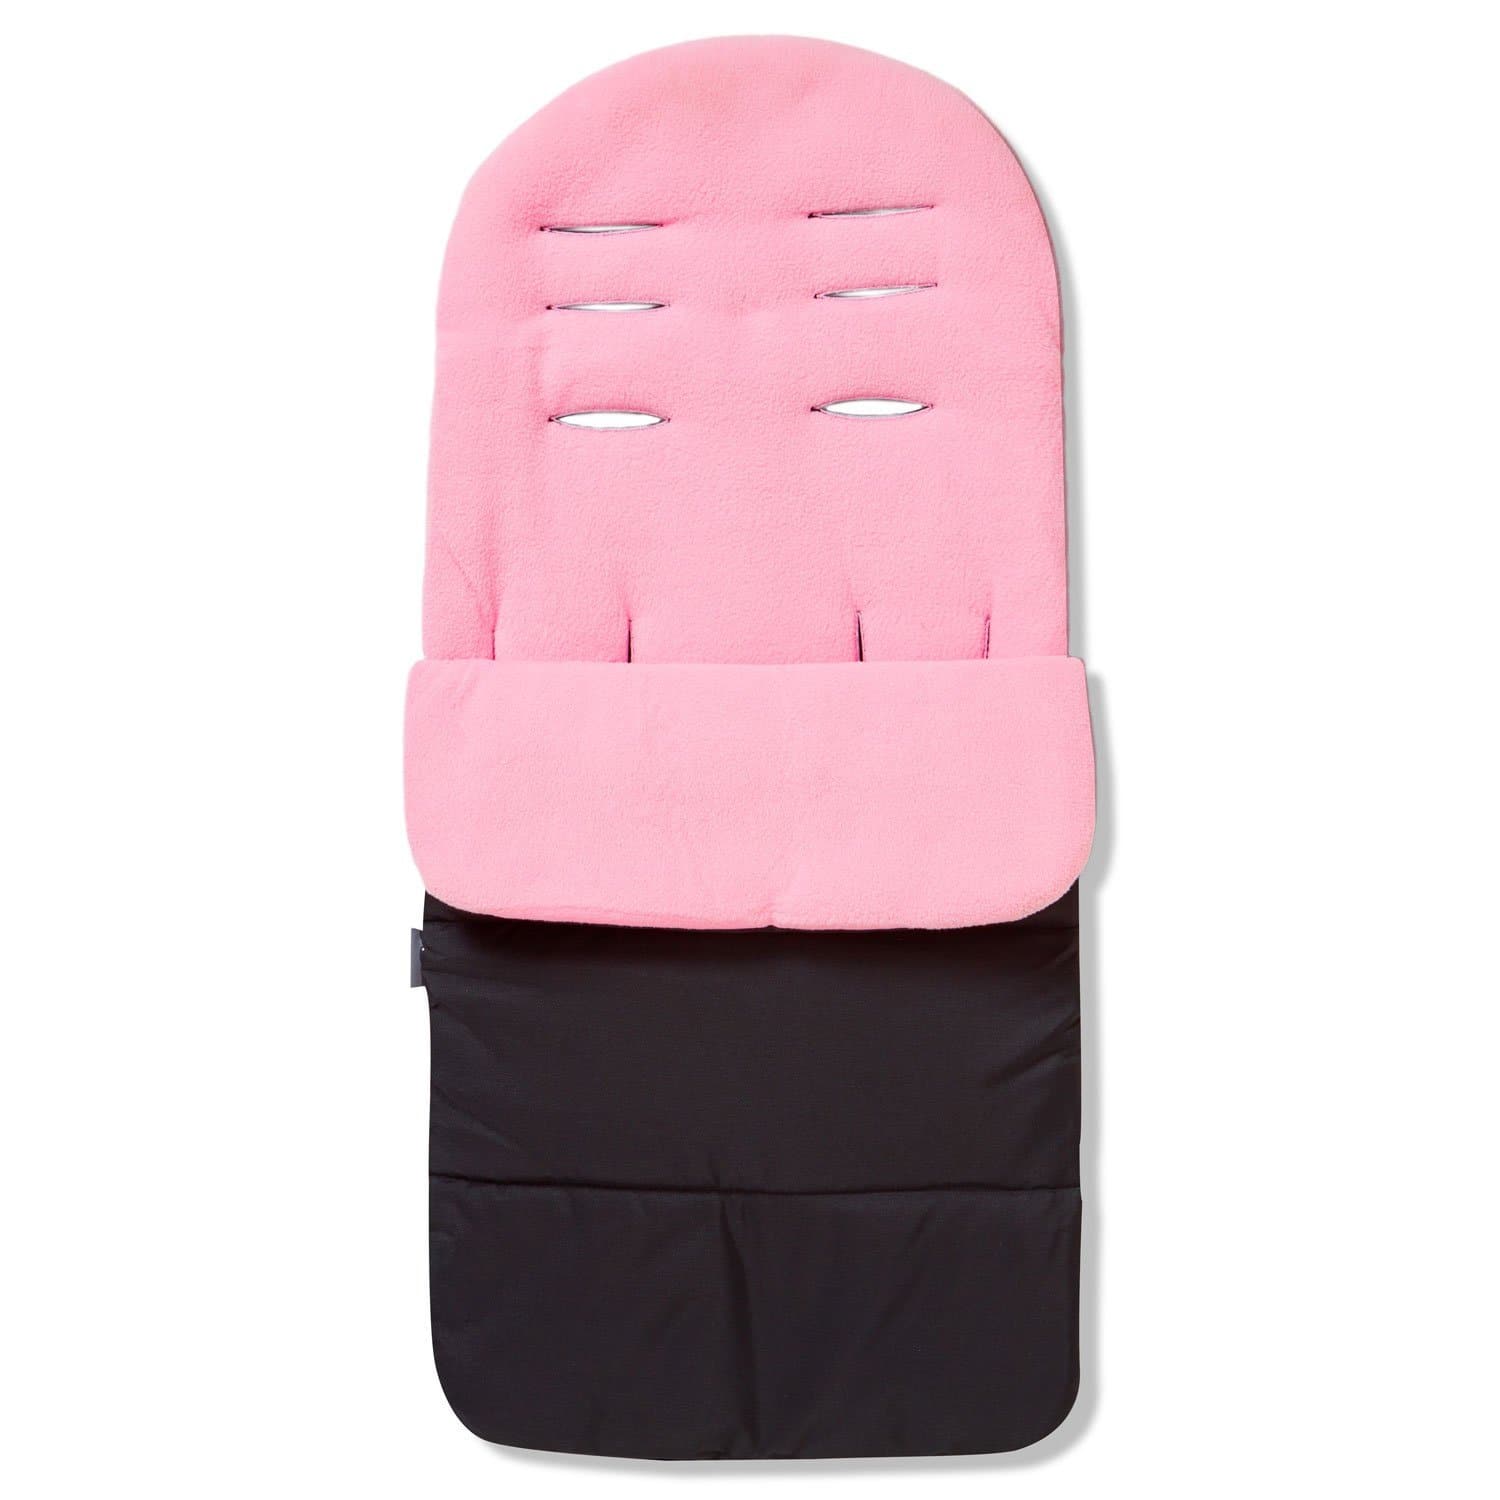 Premium Footmuff / Cosy Toes Compatible with Zeta - Candy Pink / Fits All Models | For Your Little One